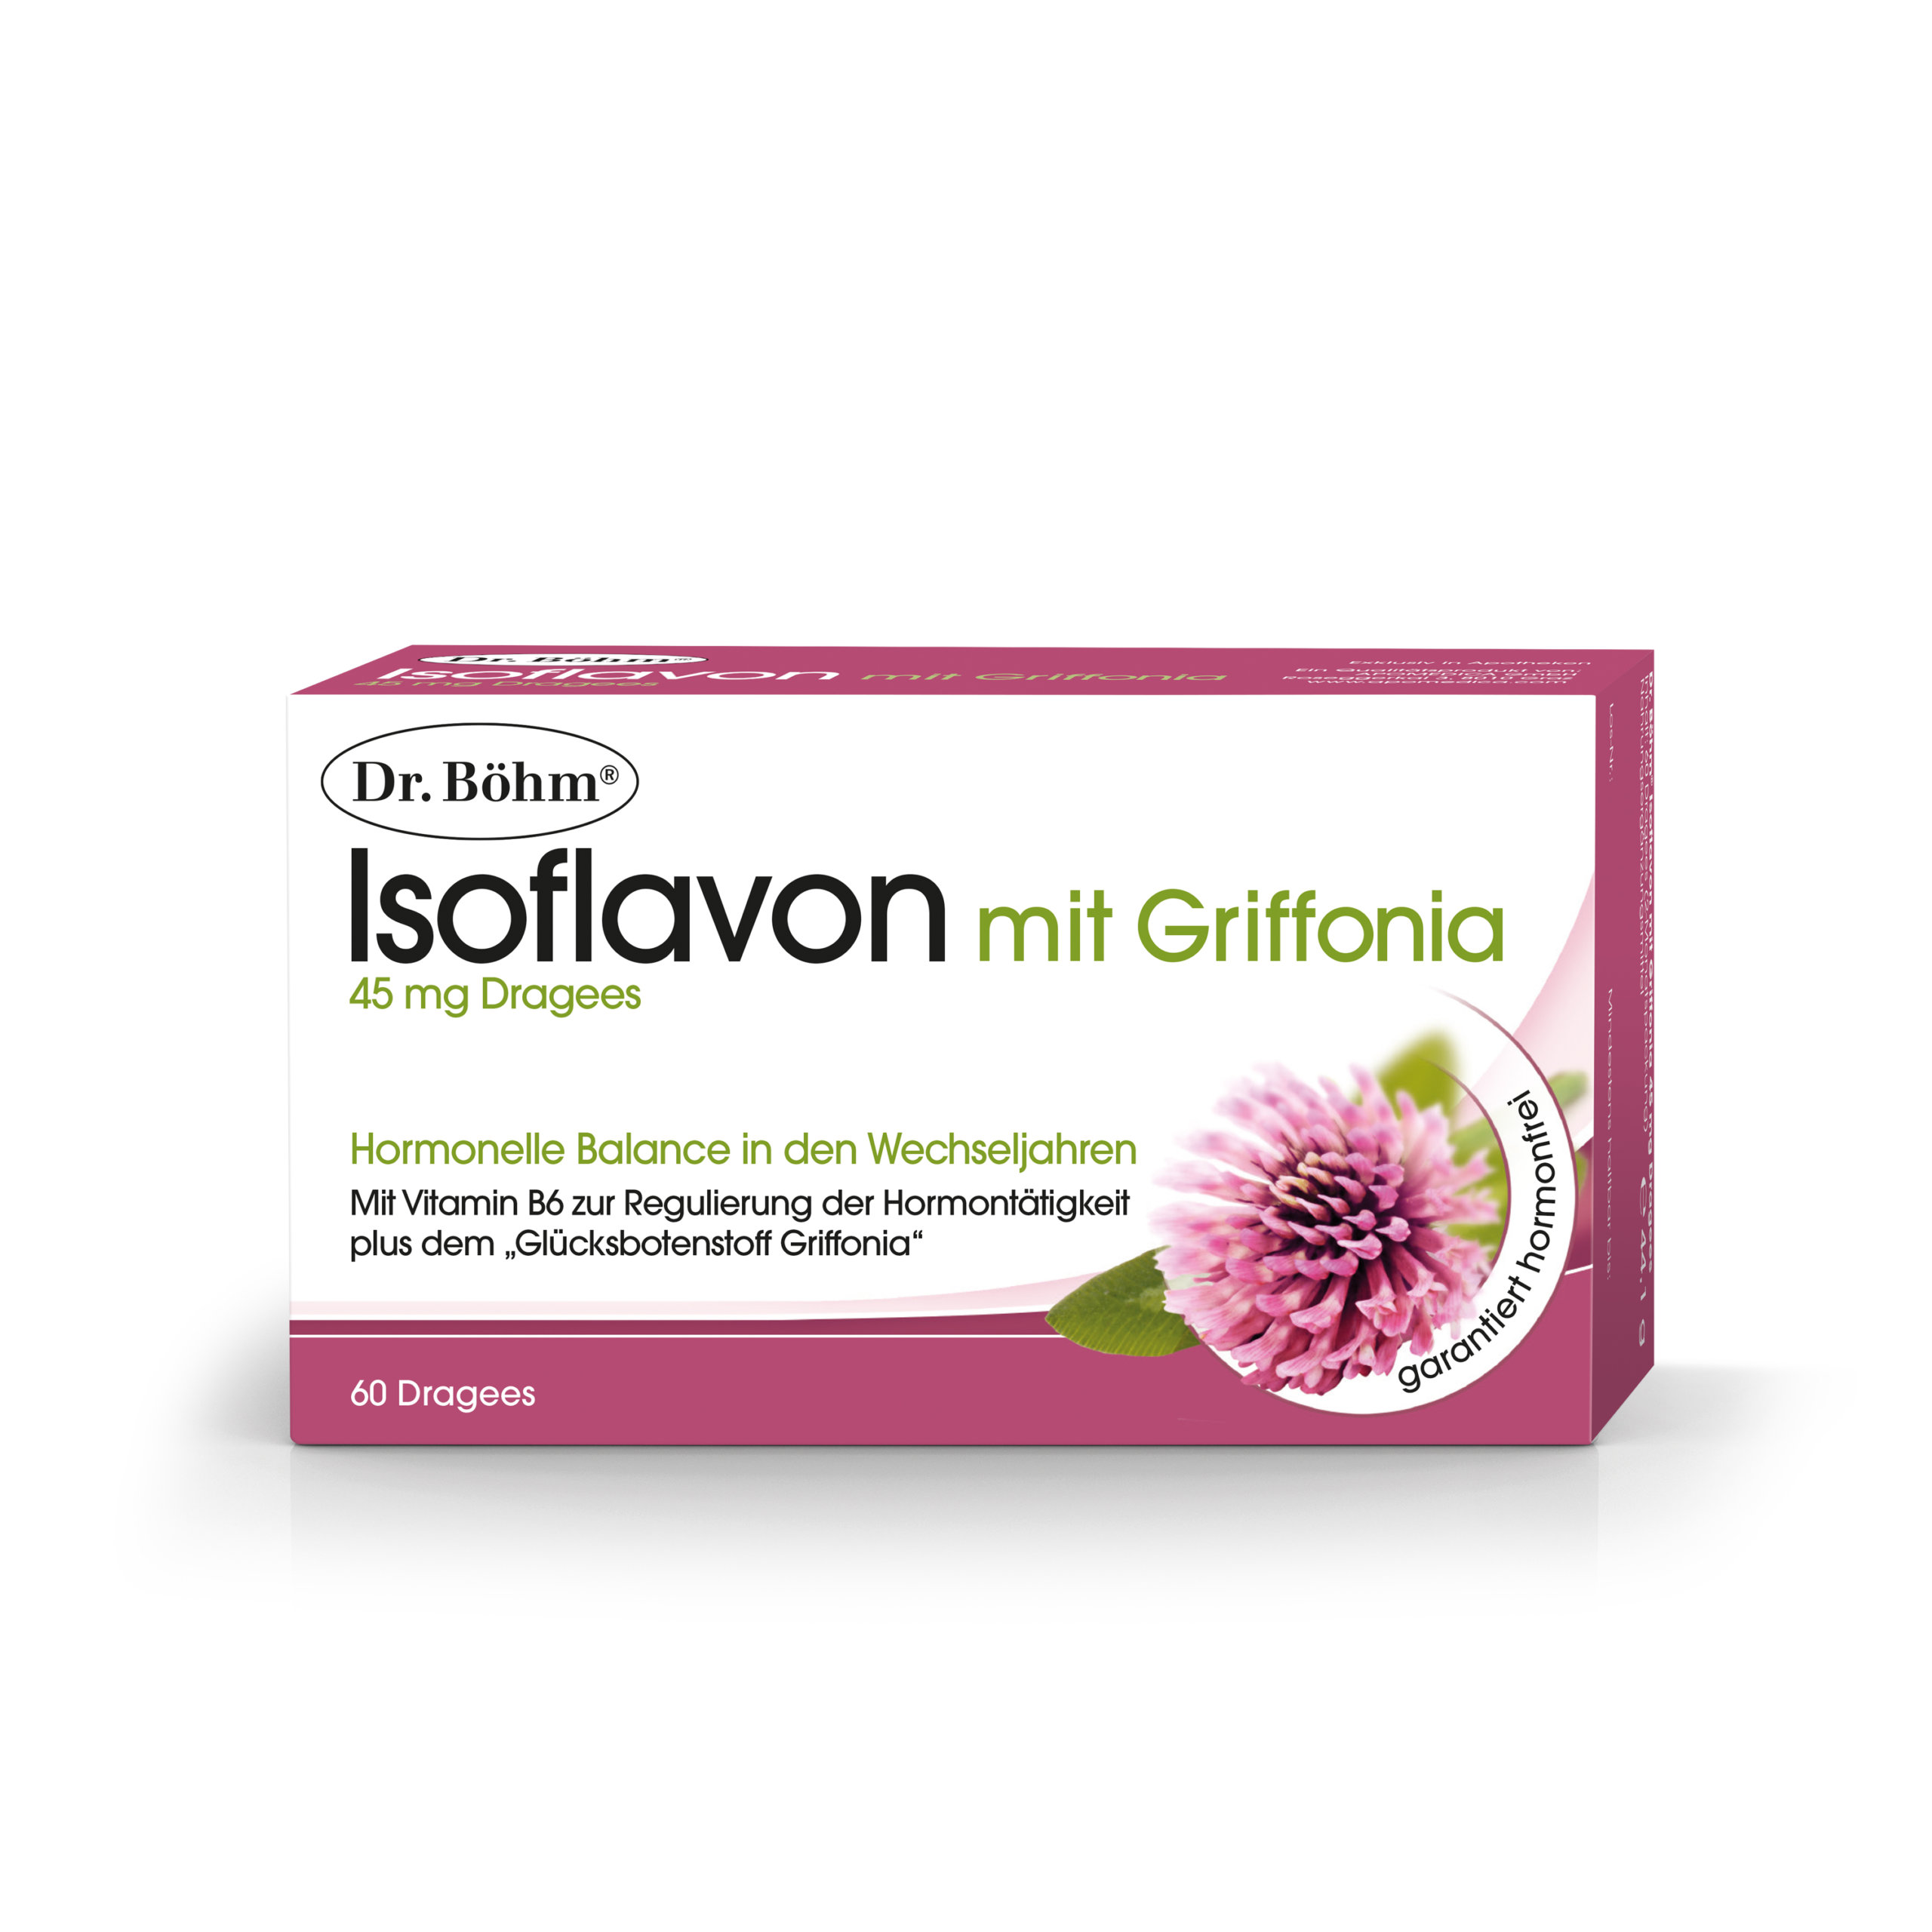 Dr. Böhm® Isoflavon mit Griffonia 45 mg Dragees